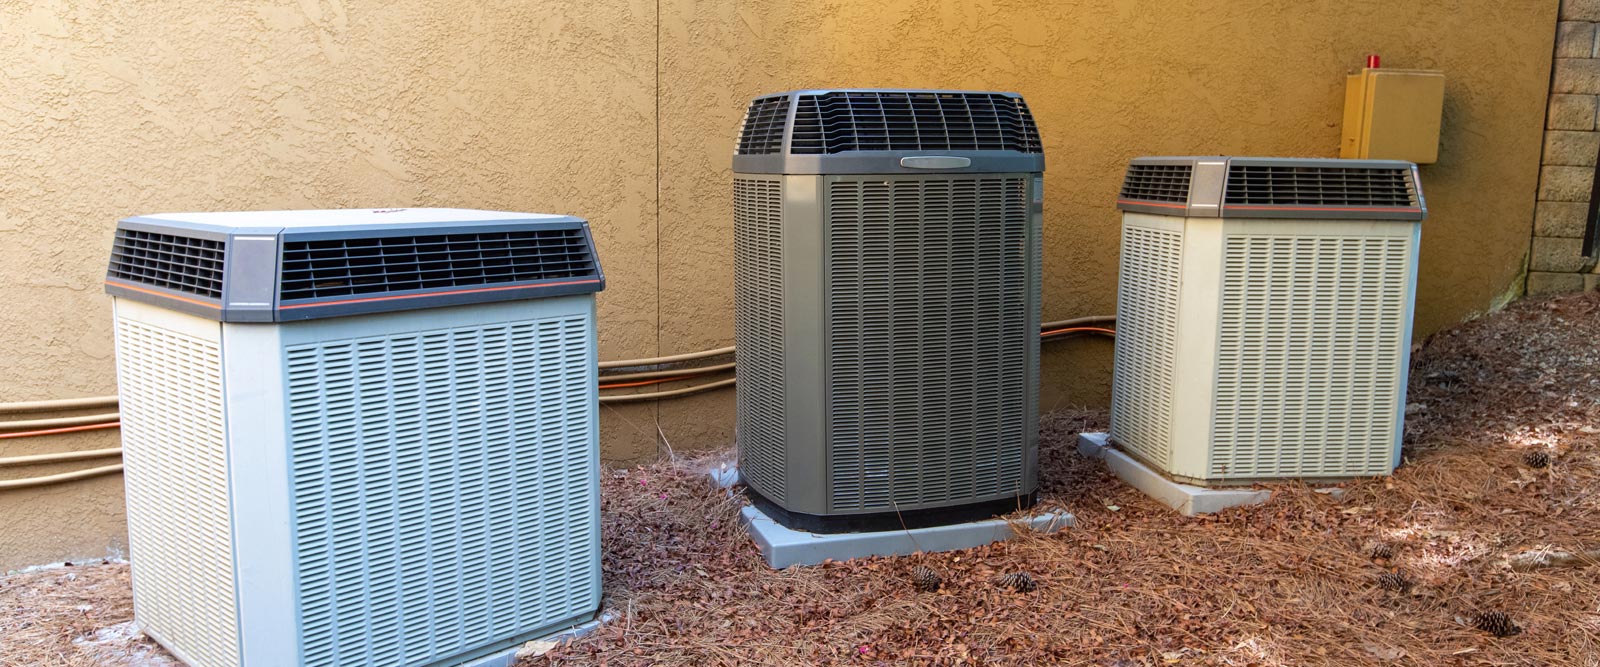 5 Signs It's Time for an HVAC Replacement 